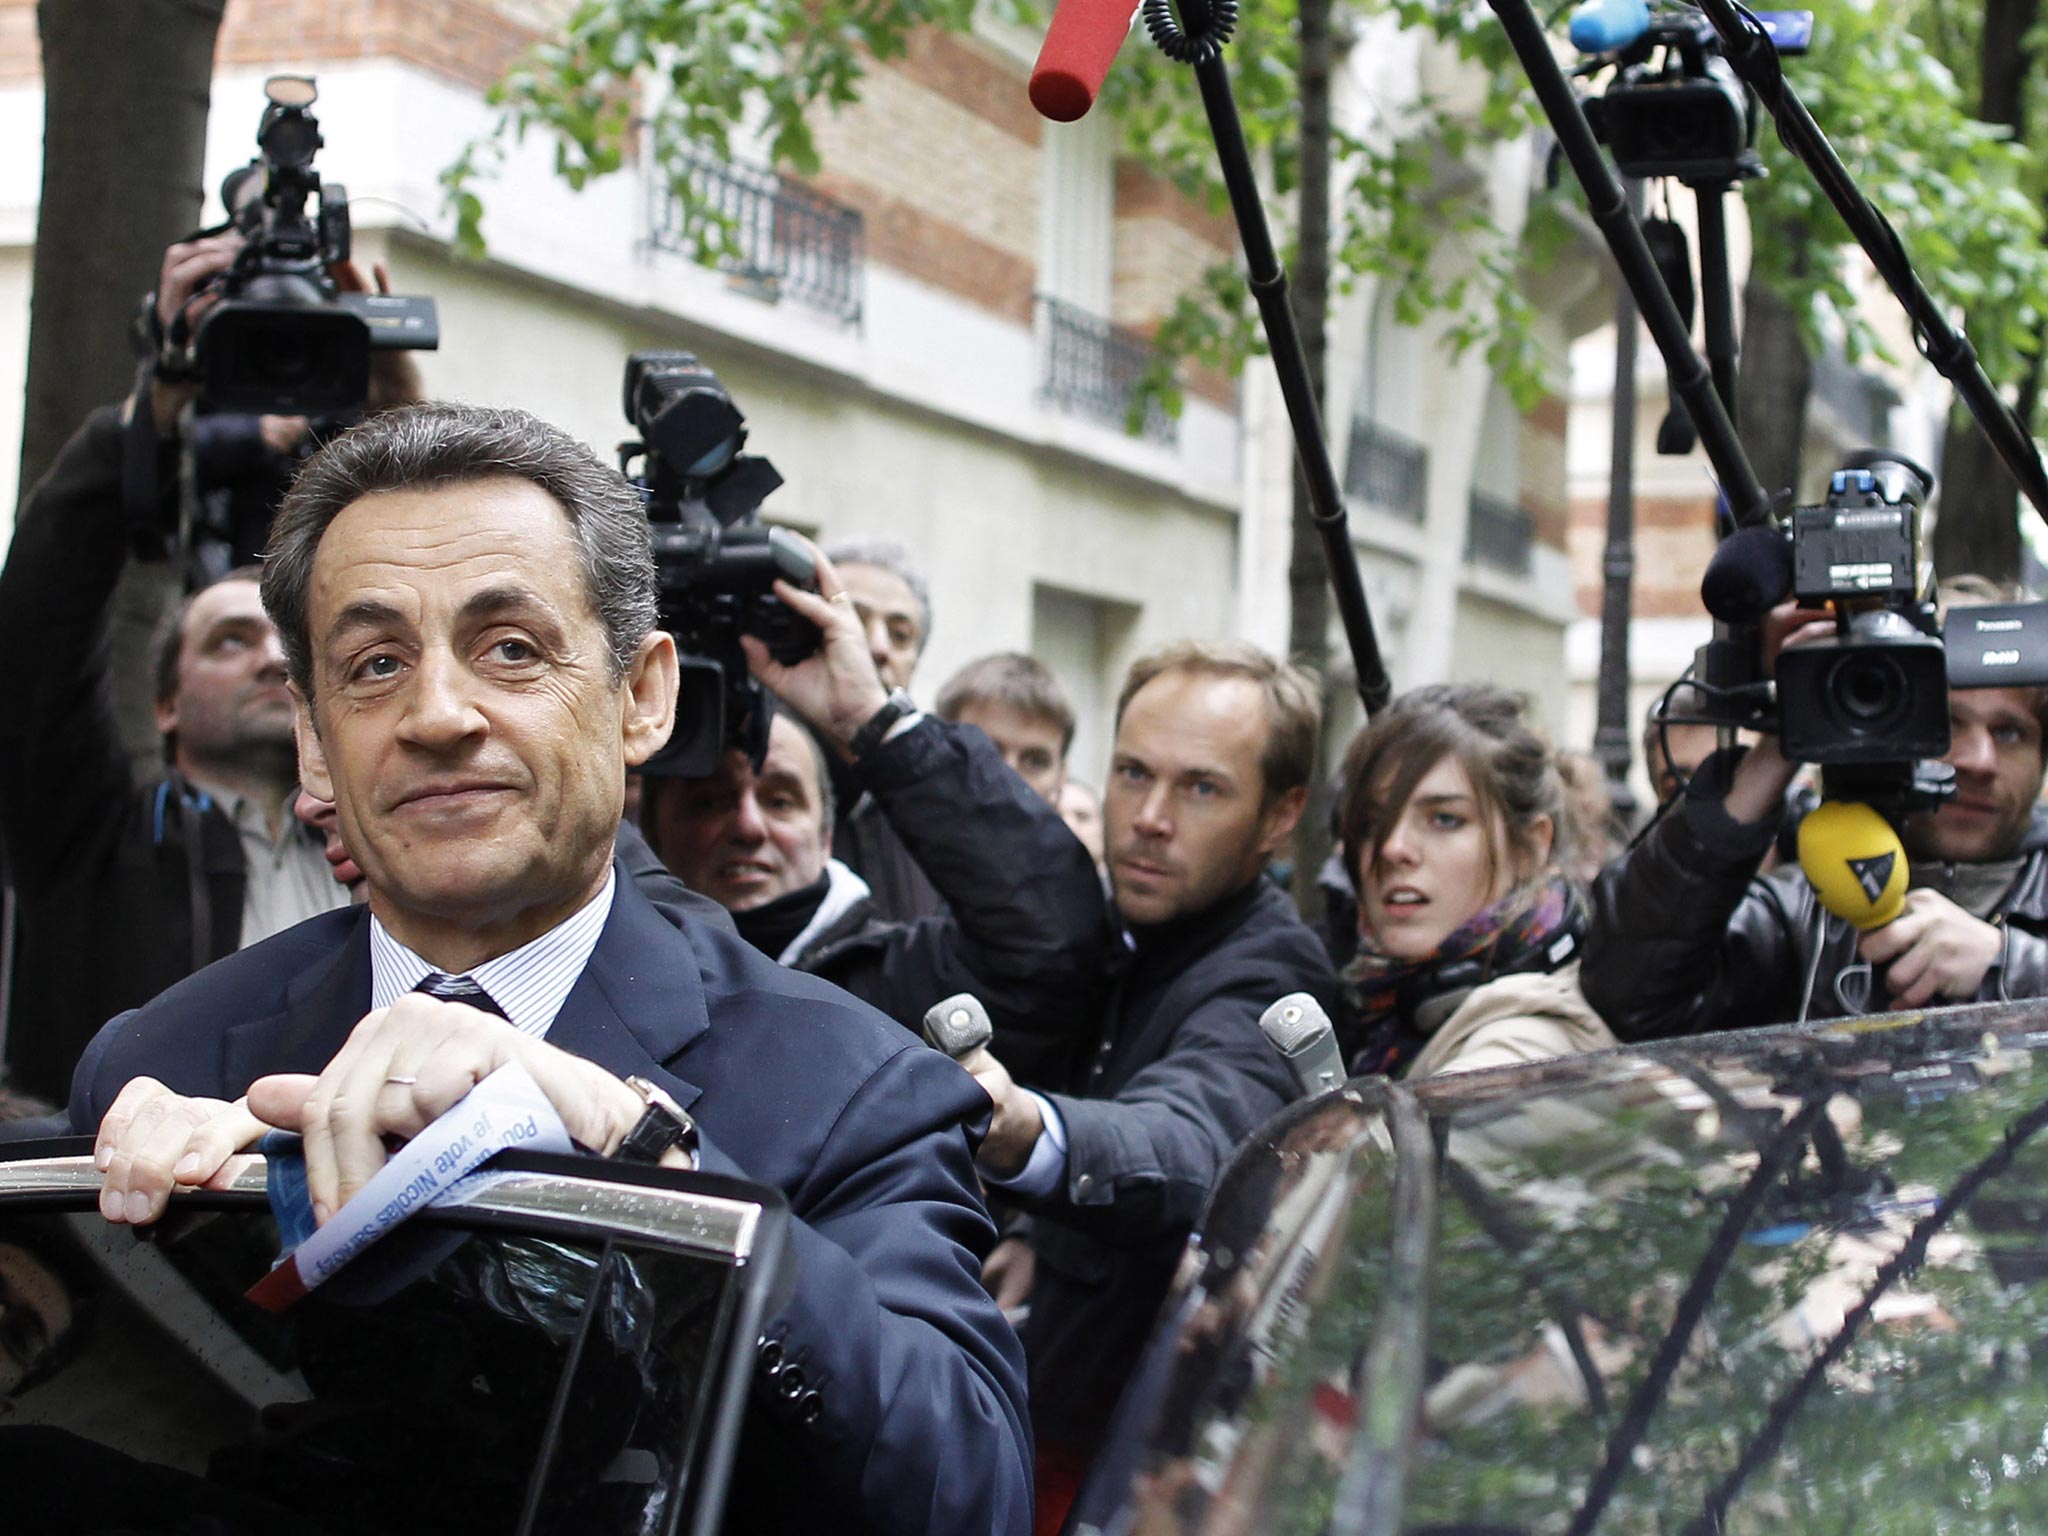 Supporters of former French President Nicolas Sarkozy claim left-wing ‘persecution’ of him, but investigations continue into his financial wrong-doing and attempts to influence the judiciary